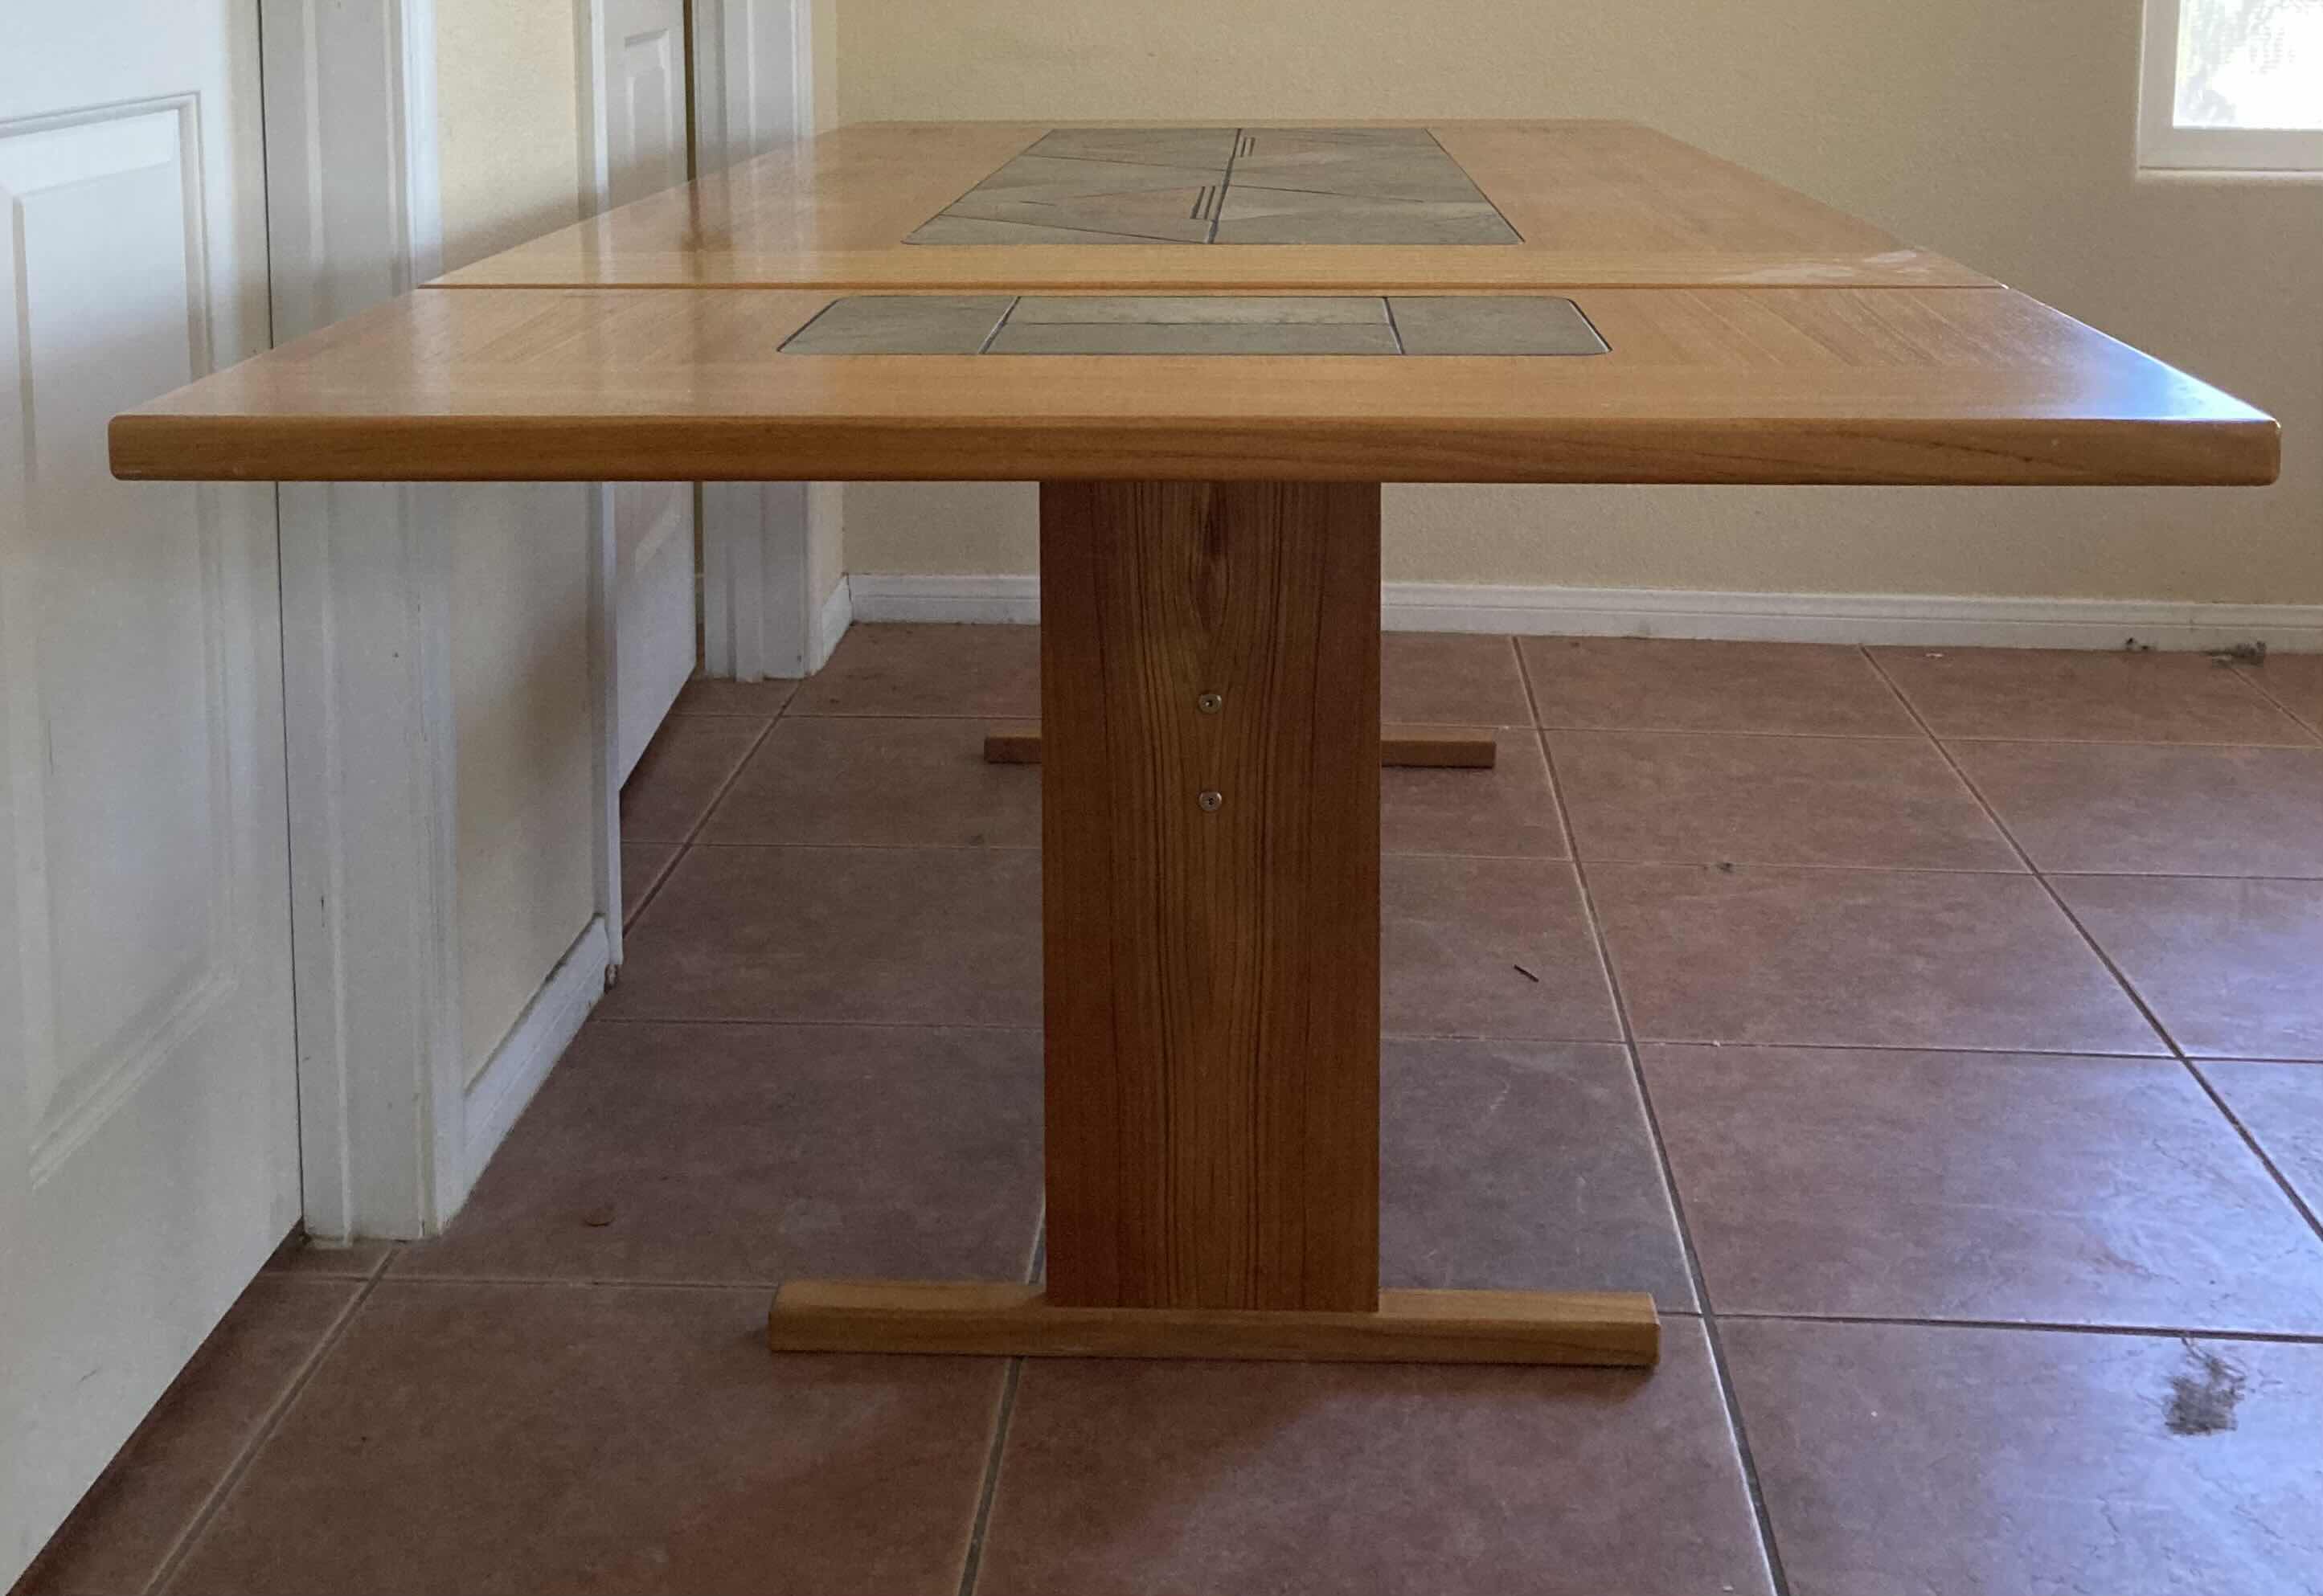 Photo 4 of SOUTHWESTERN STYLE WOOD FINISH DINING TABLE W TILE TOP INLAY 63”-79” X 35.5” H28.5”